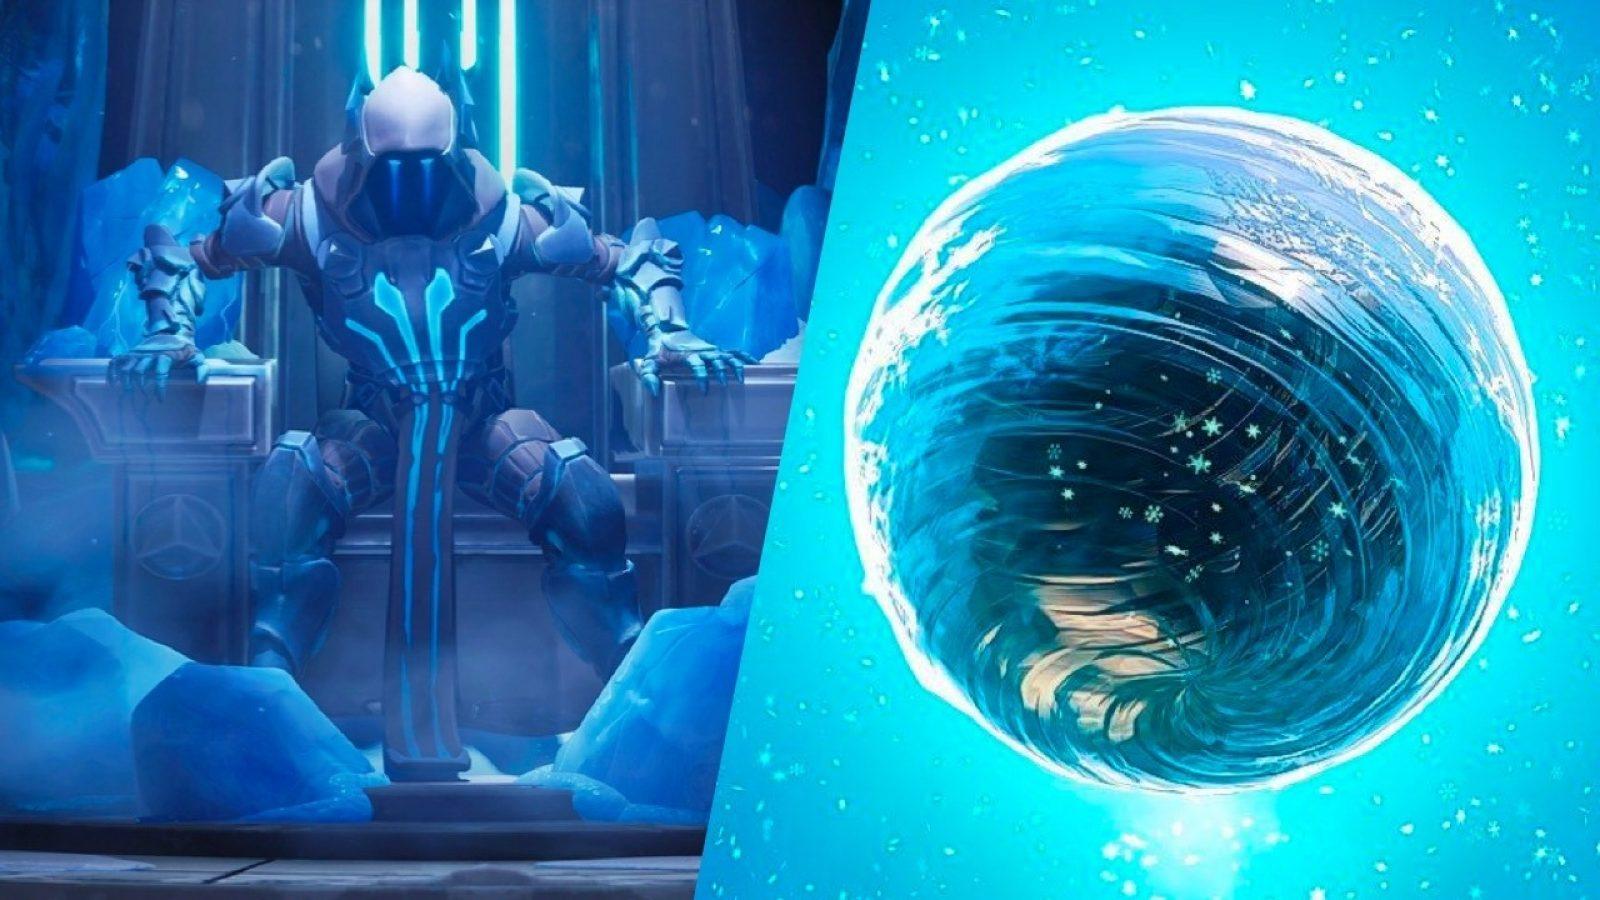 Is Fortnite's Ice King going to die this season? Here's why it might